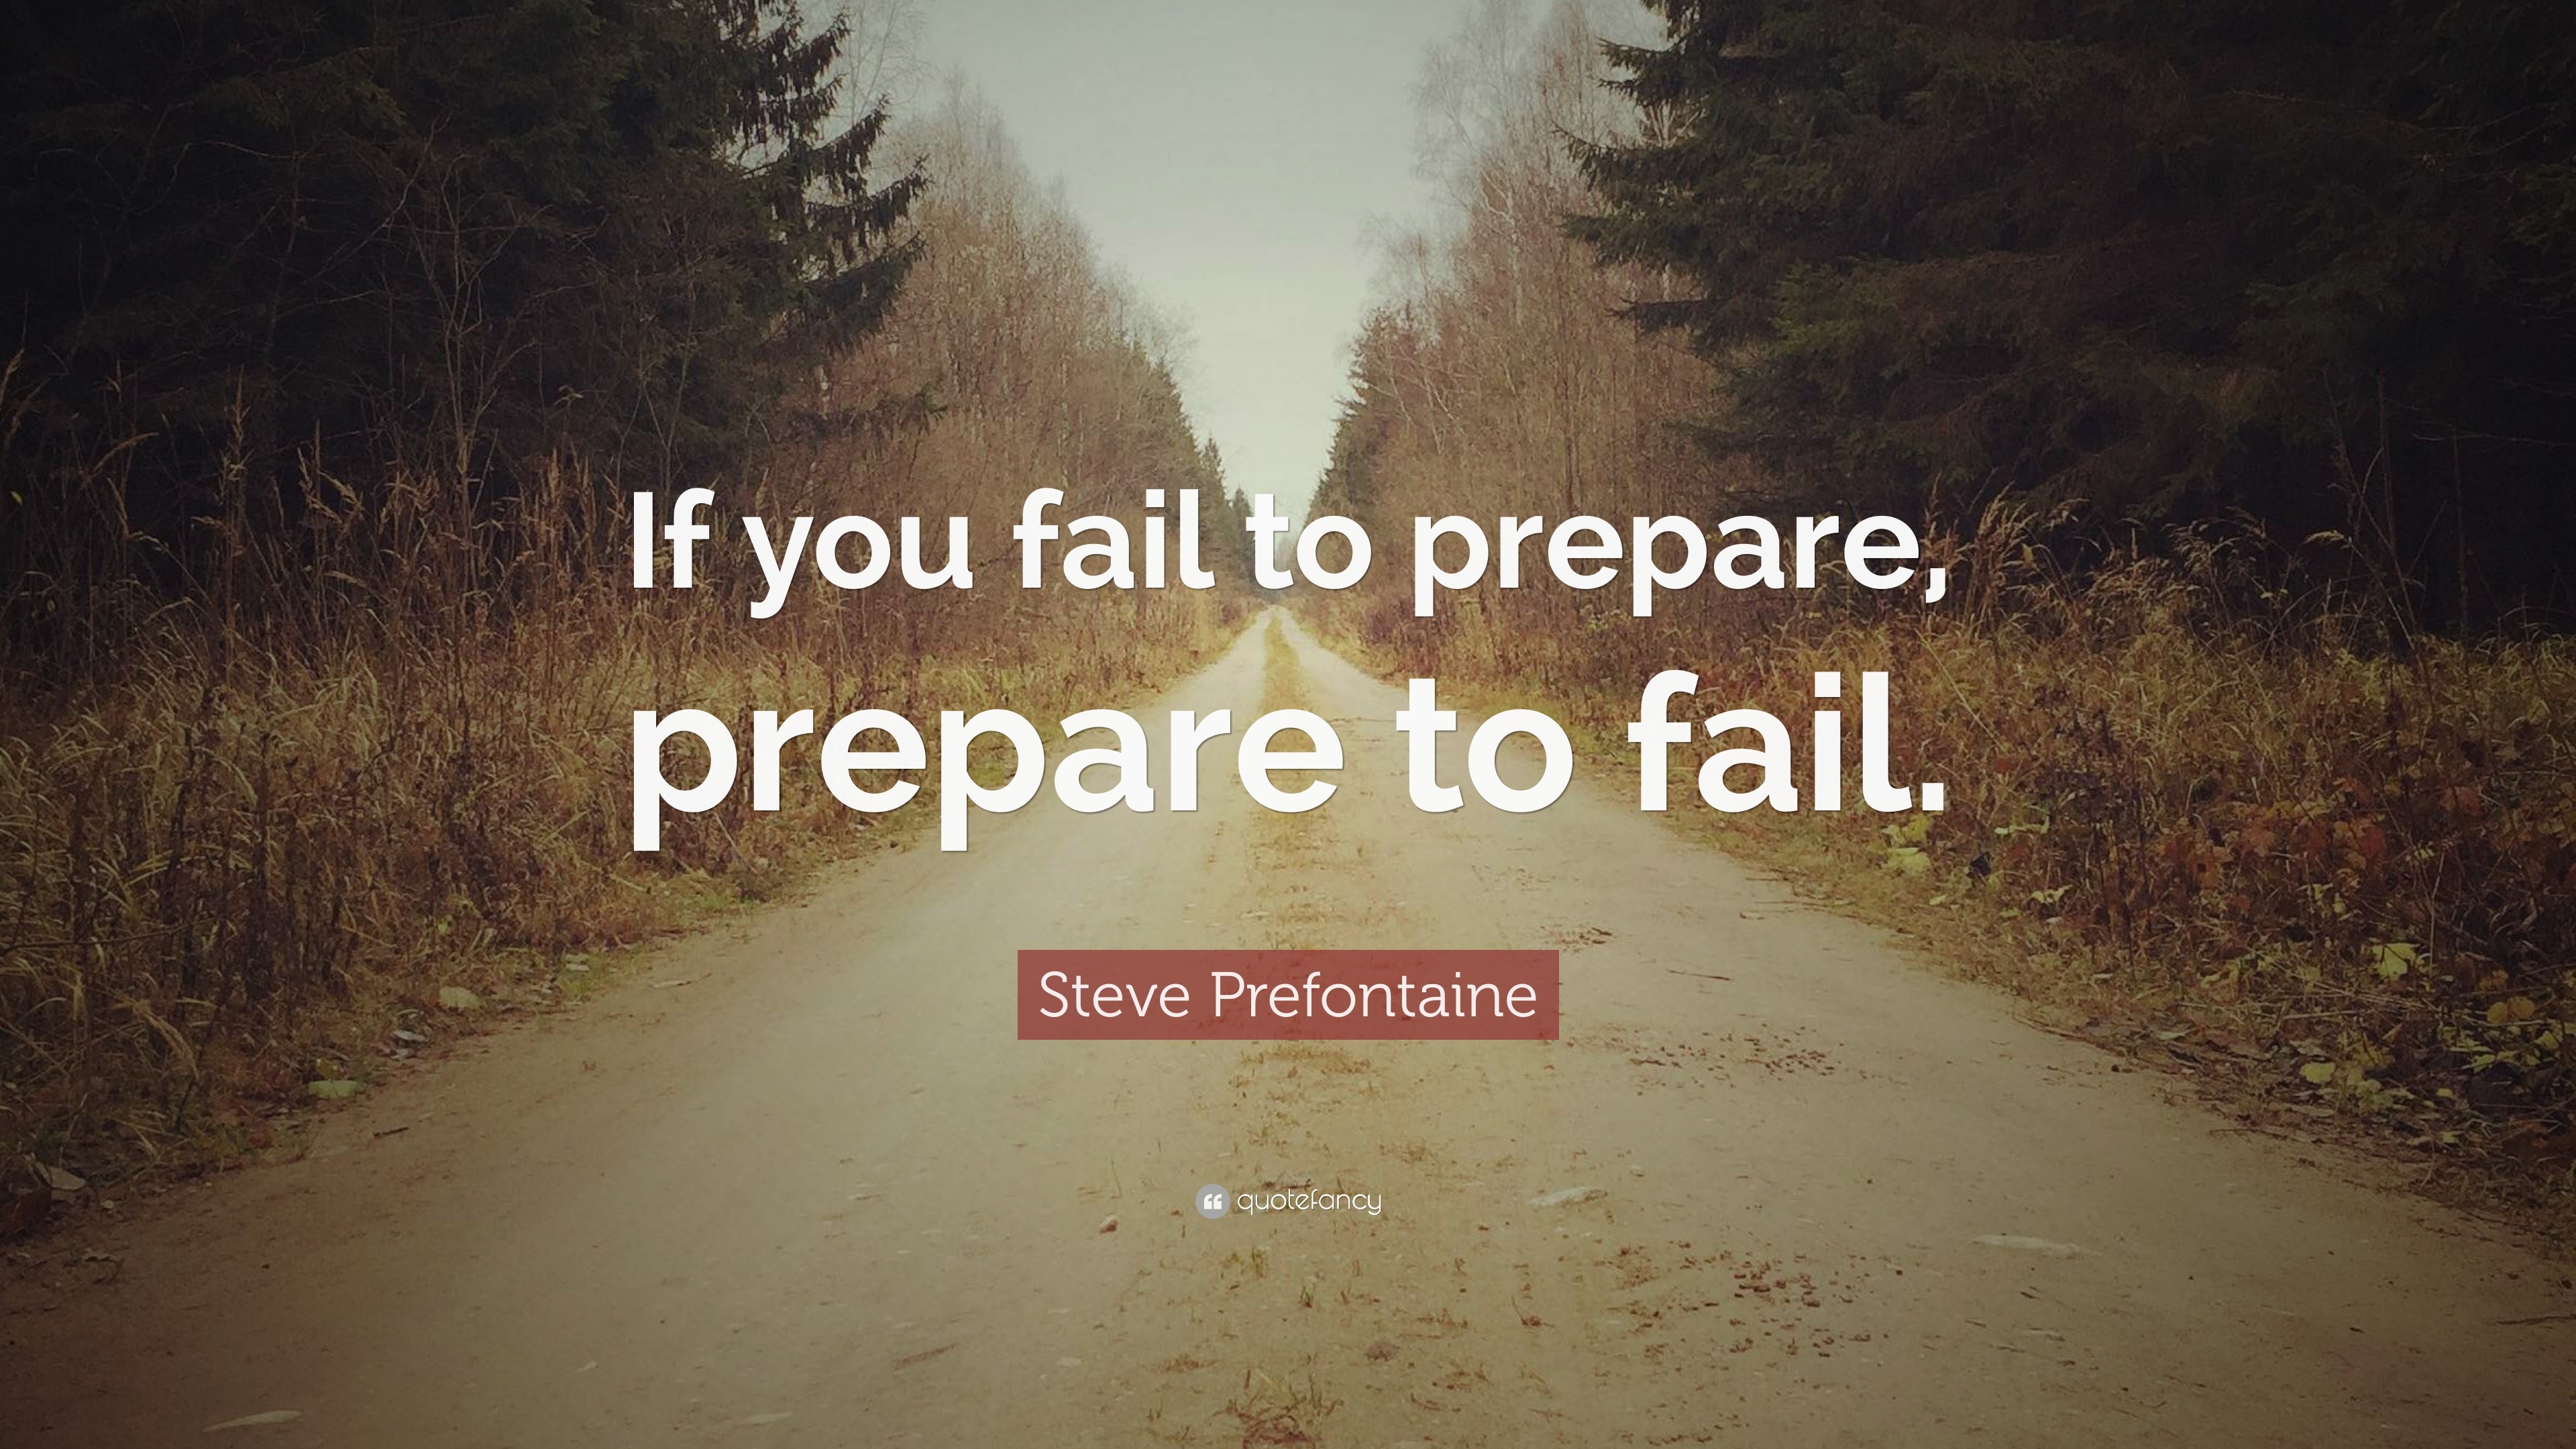 Steve Prefontaine Quotes (35 wallpapers) - Quotefancy